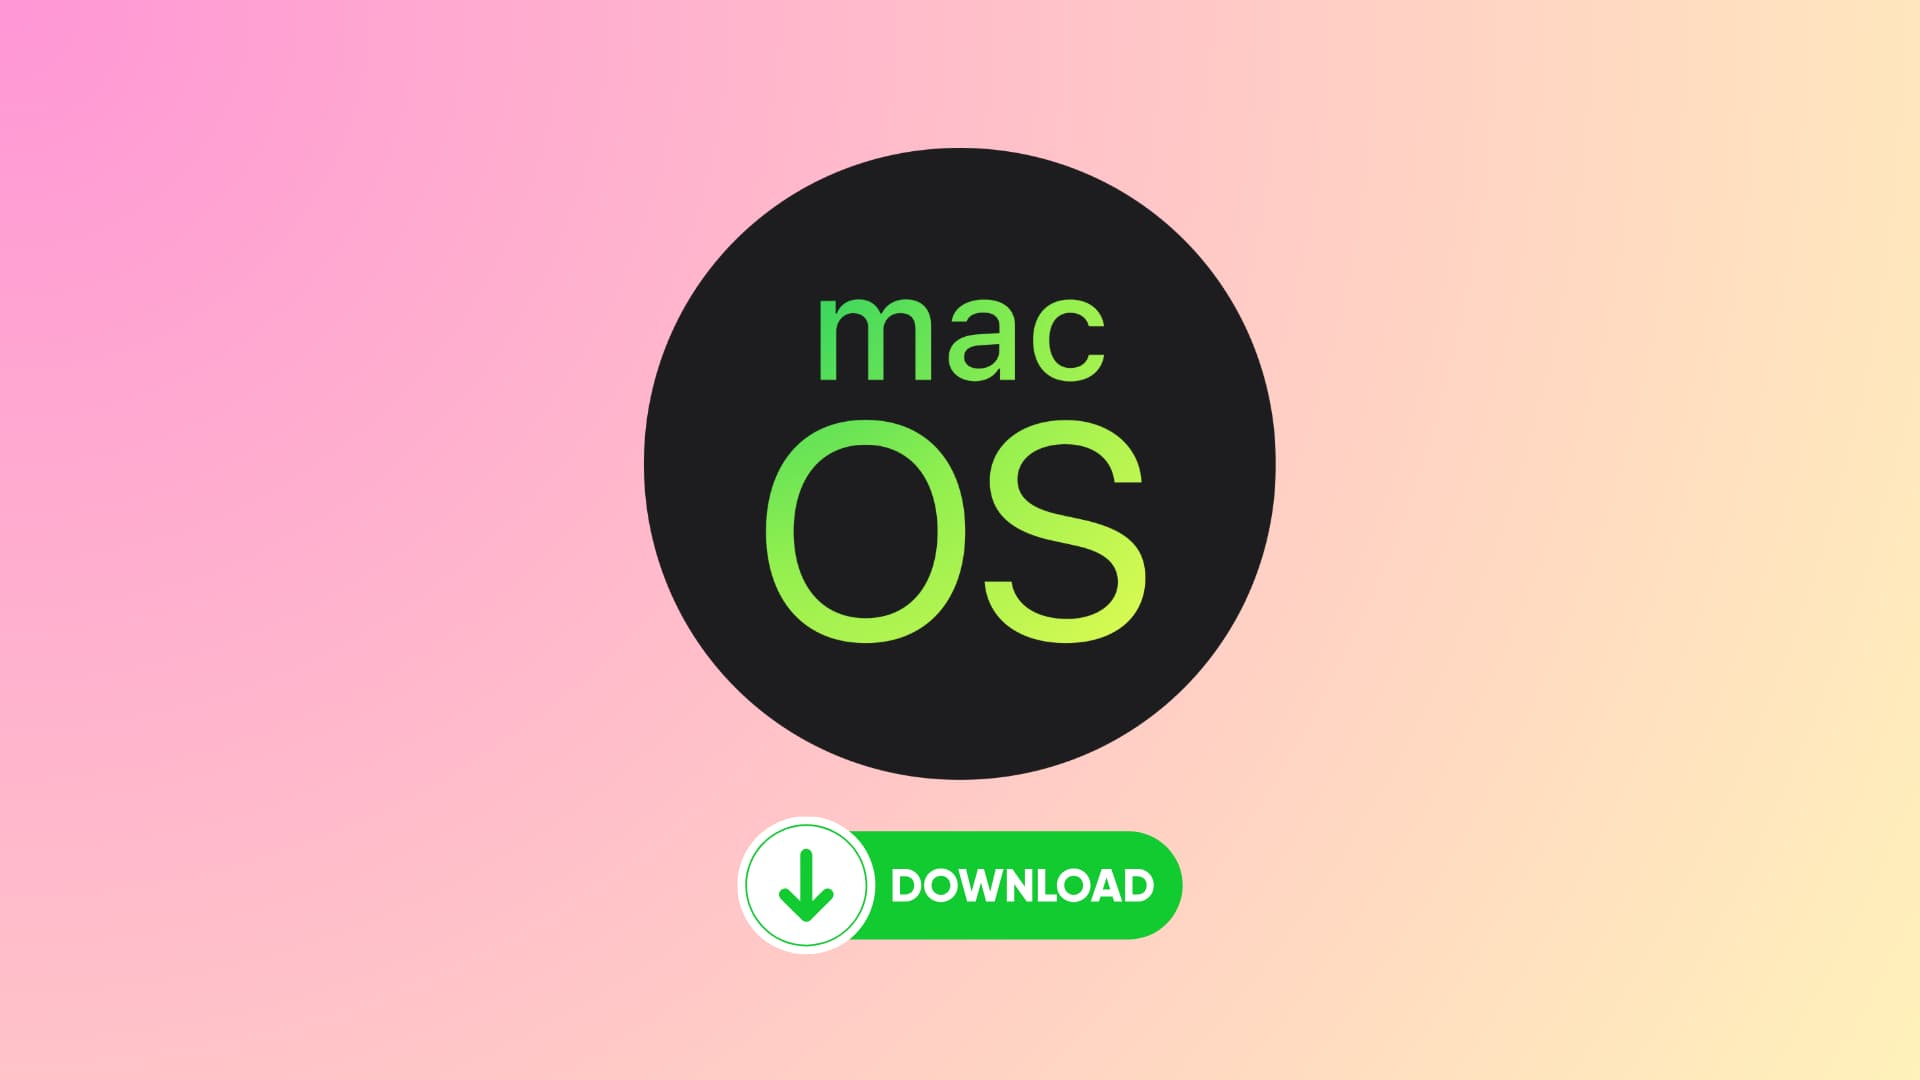 macOS logo with a Download button